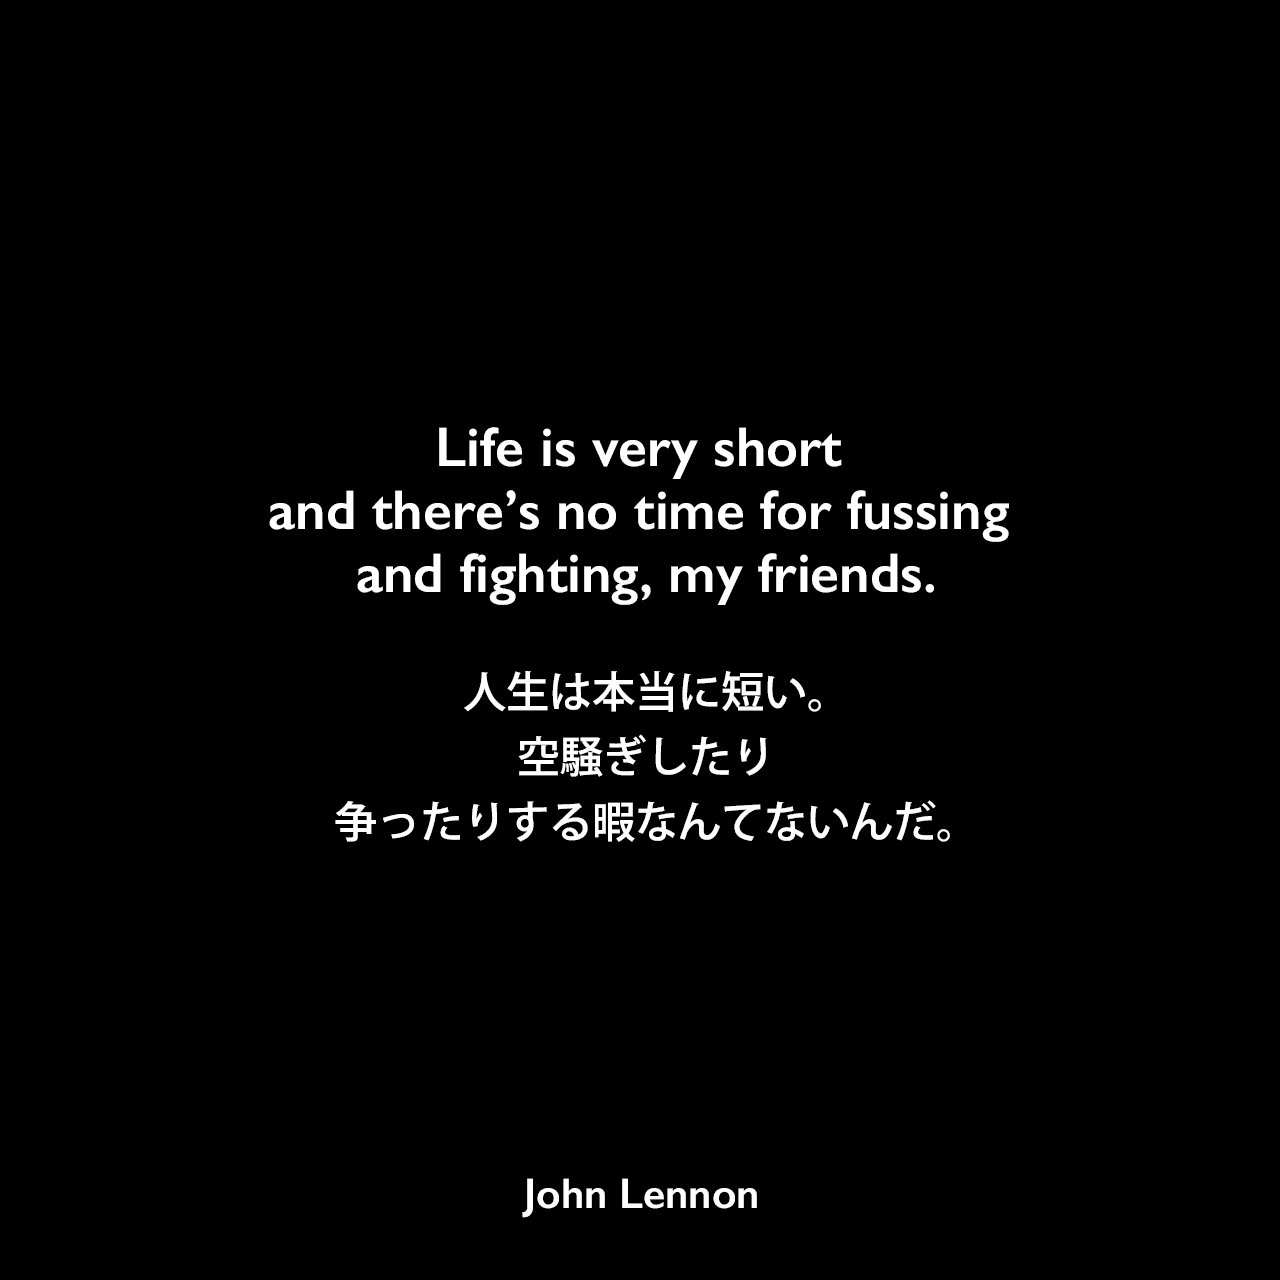 Life is very short and there’s no time for fussing and fighting, my friends.人生は本当に短い。空騒ぎしたり、争ったりする暇なんてないんだ。John Lennon